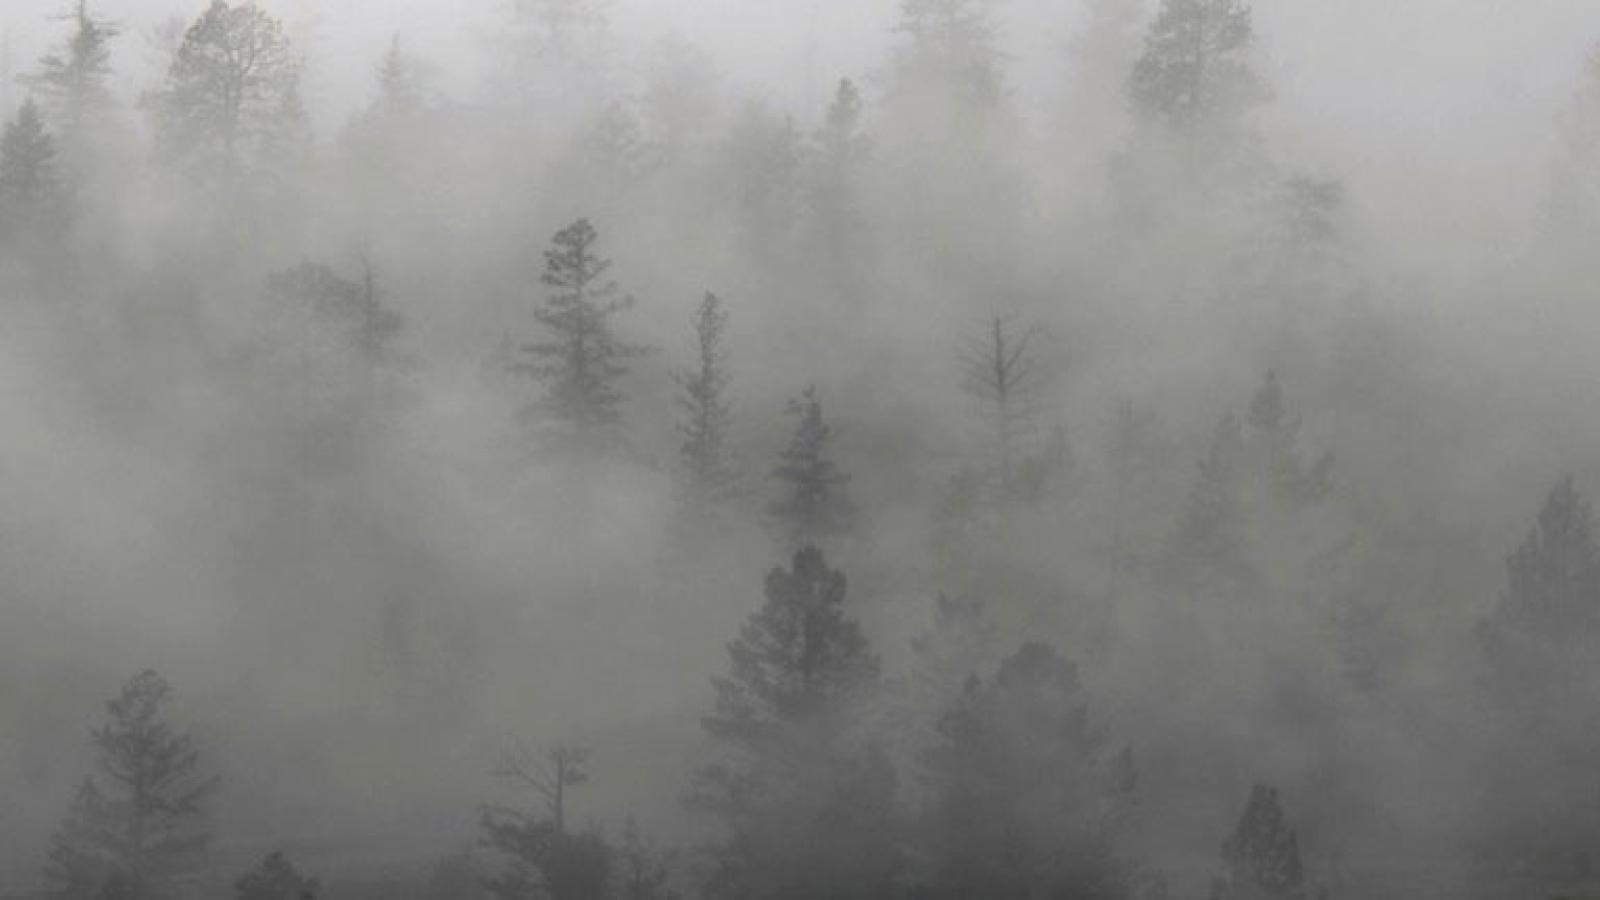 A view across pine trees shrouded in fog